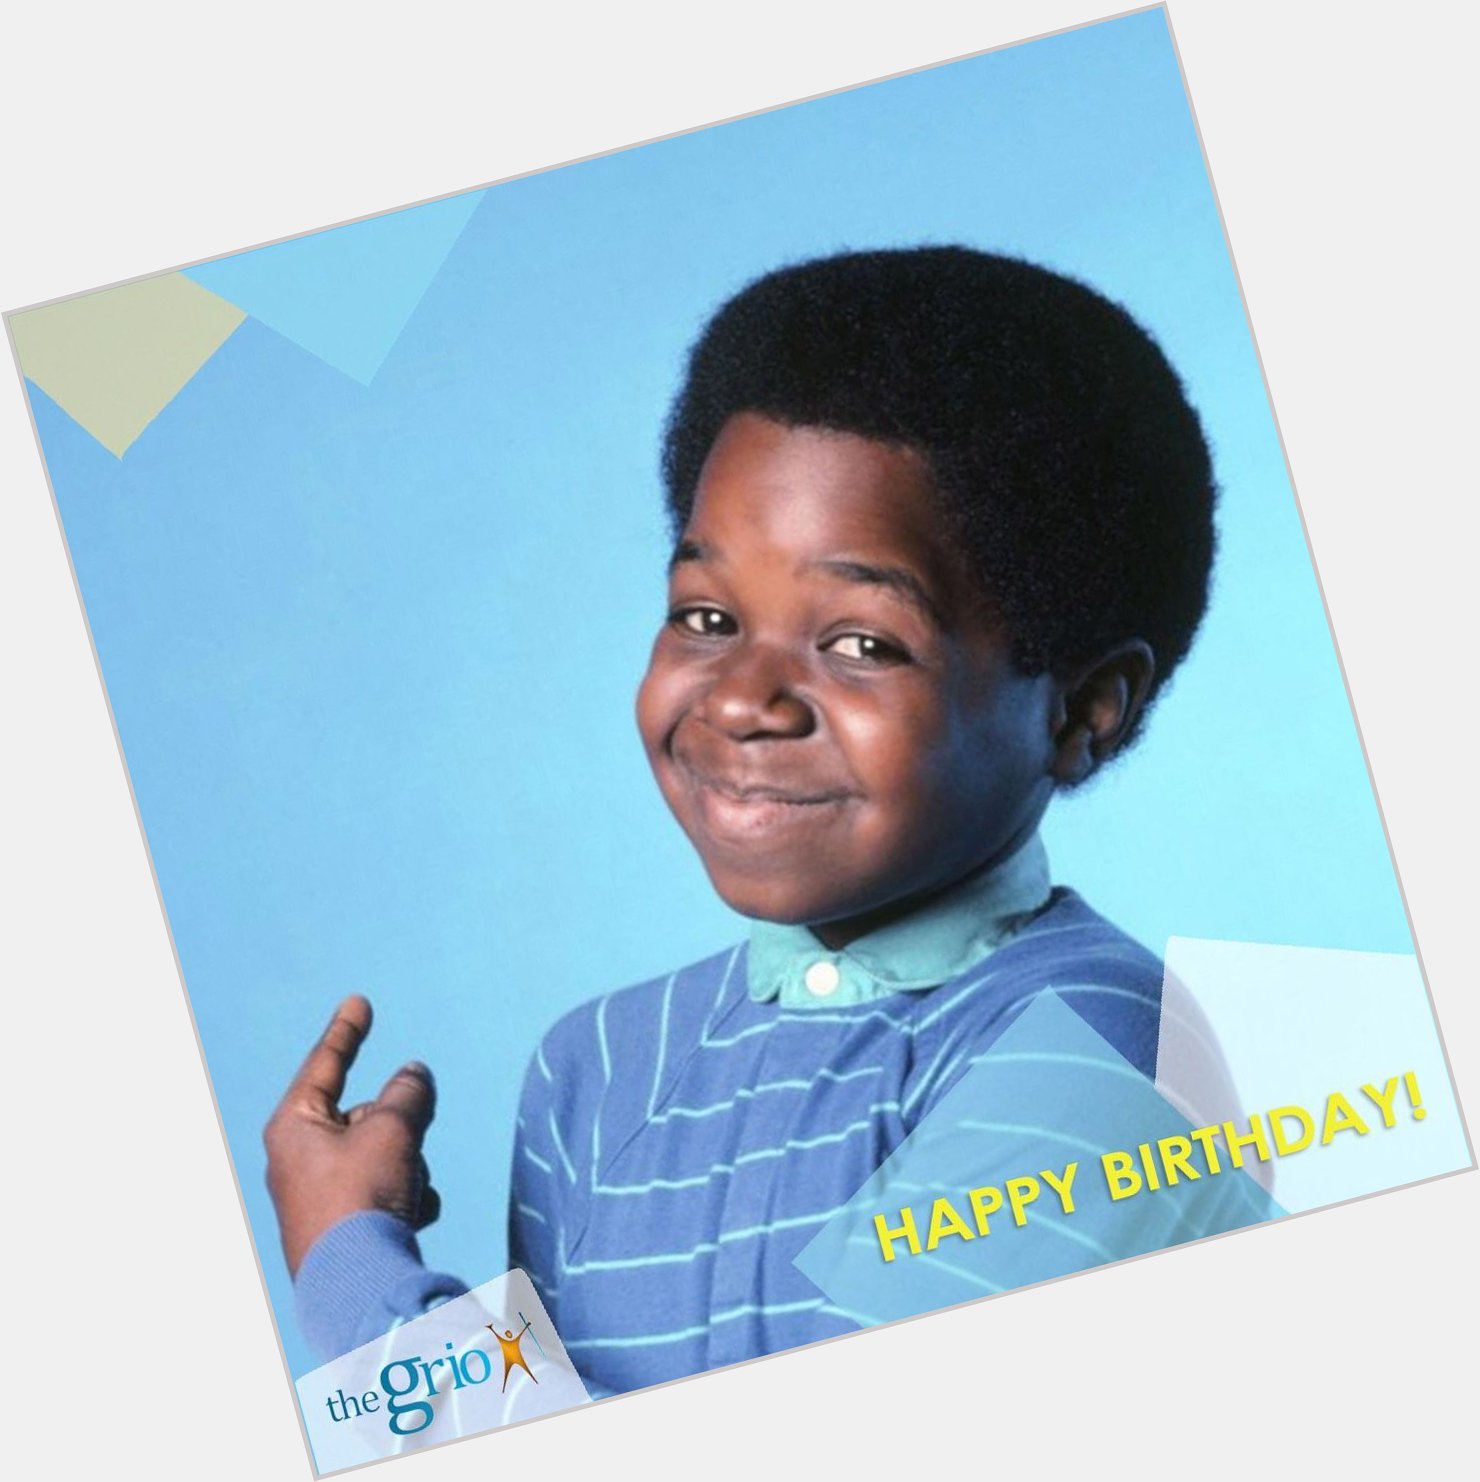 Today, Gary Coleman would have turned 50 years old! Happy Birthday! 